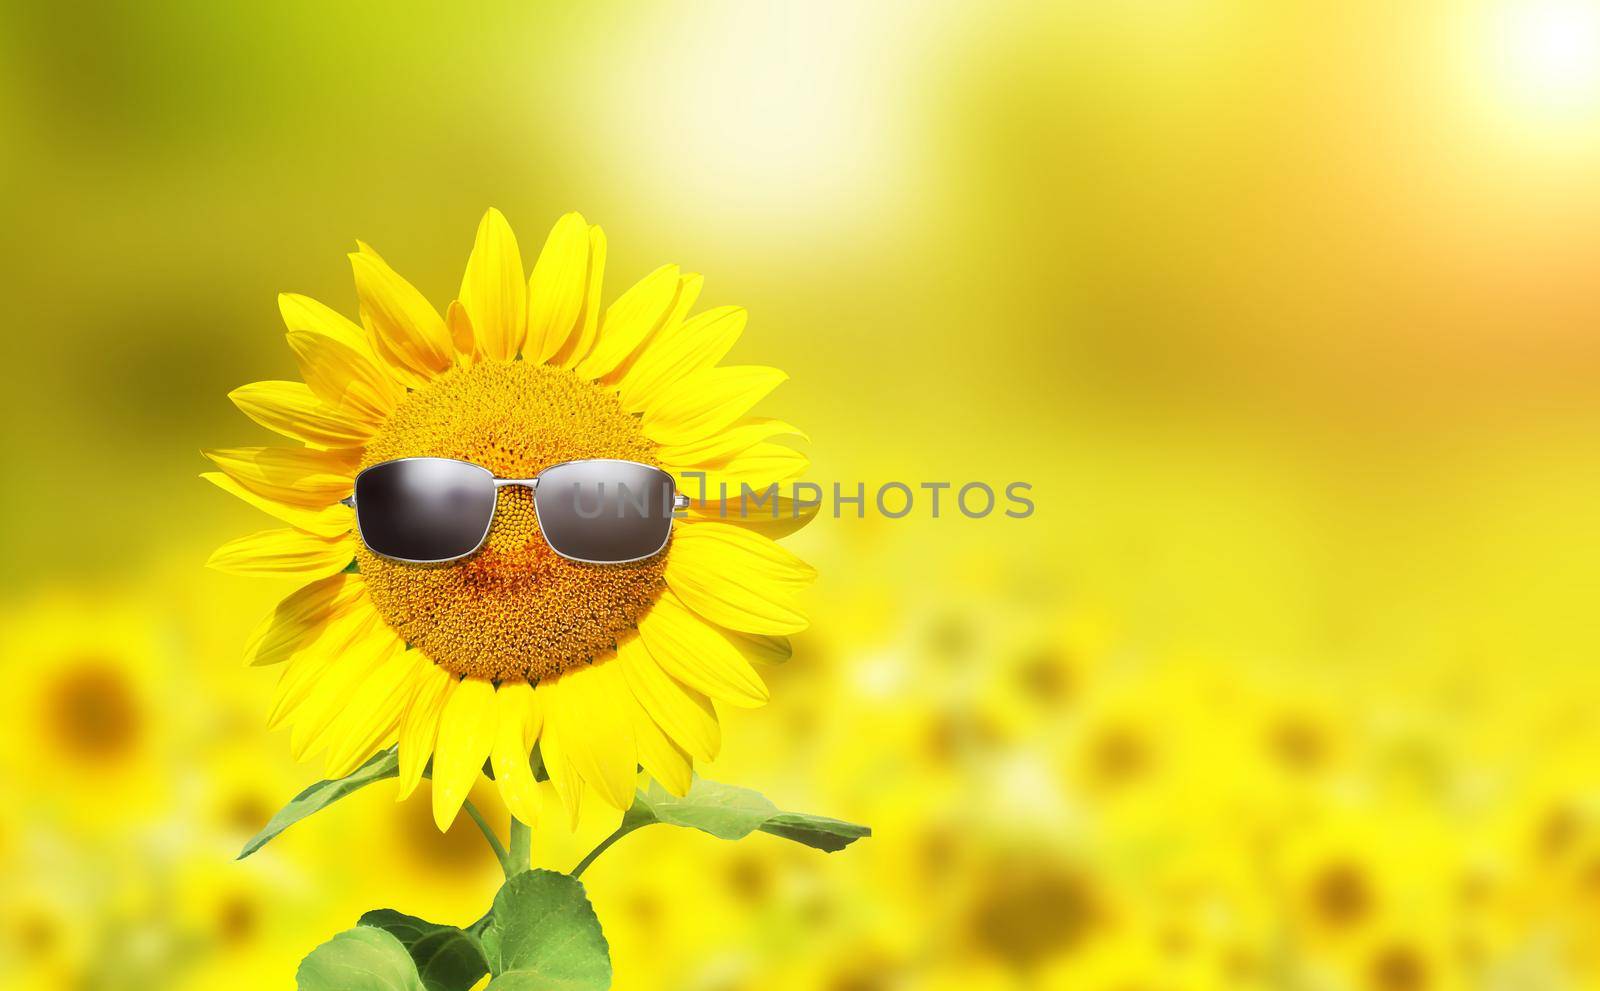 Funny sunflower with sunglasses on a sunset by Taut